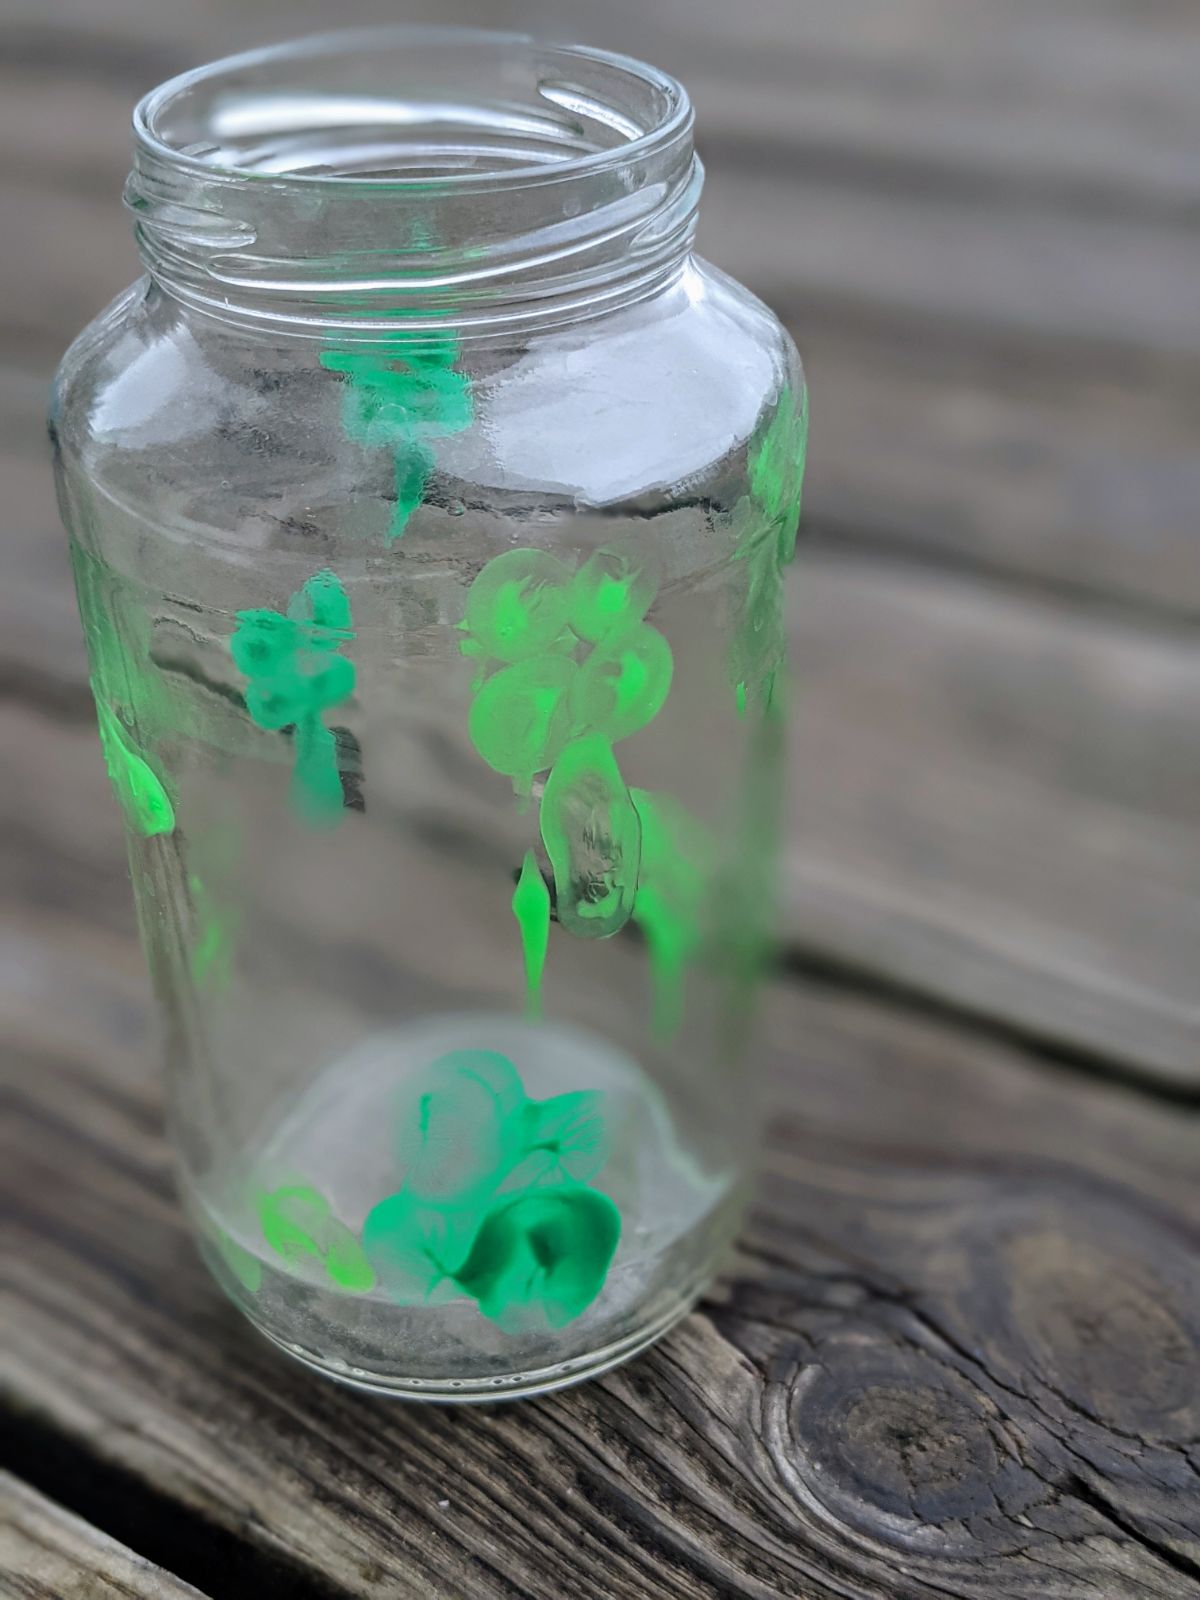 DIY Thumb + Puffy Paint Clover = shamrock vase outside on the deck